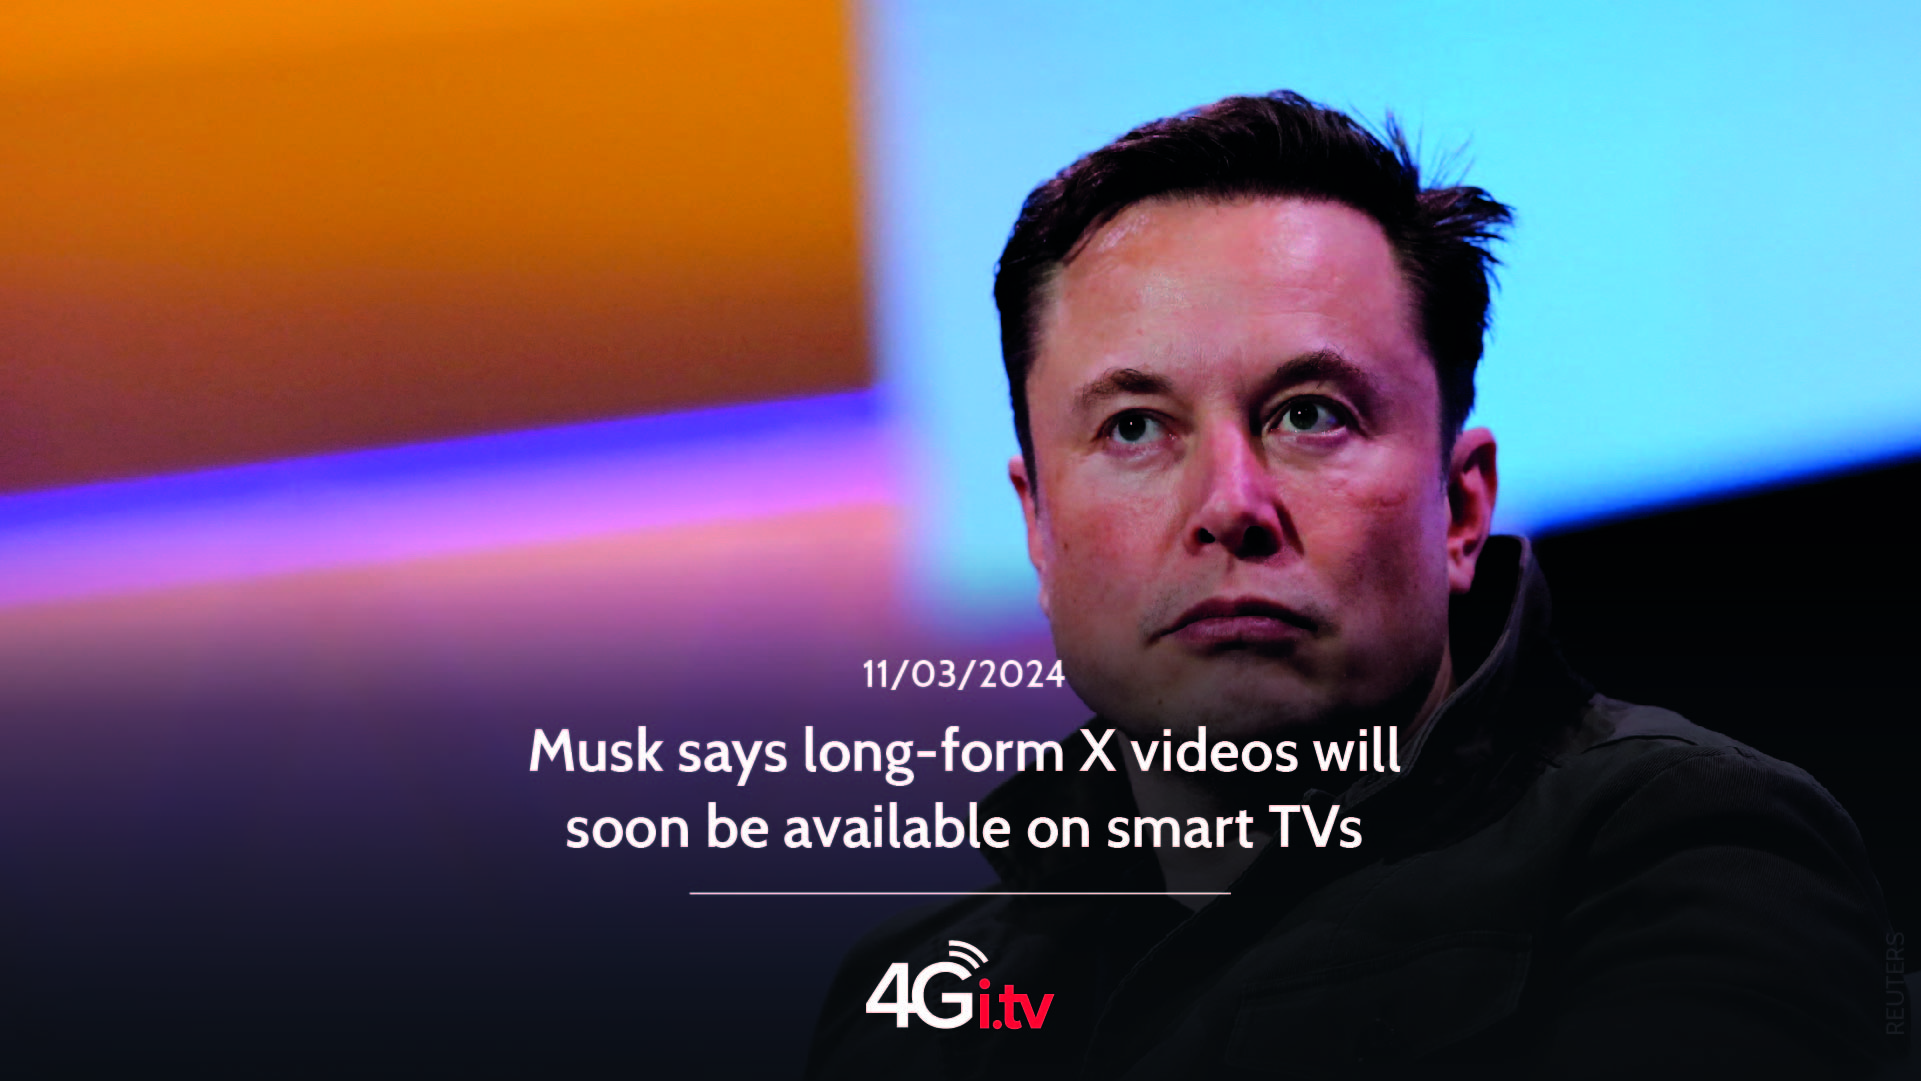 Подробнее о статье Musk says long-form X videos will soon be available on smart TVs